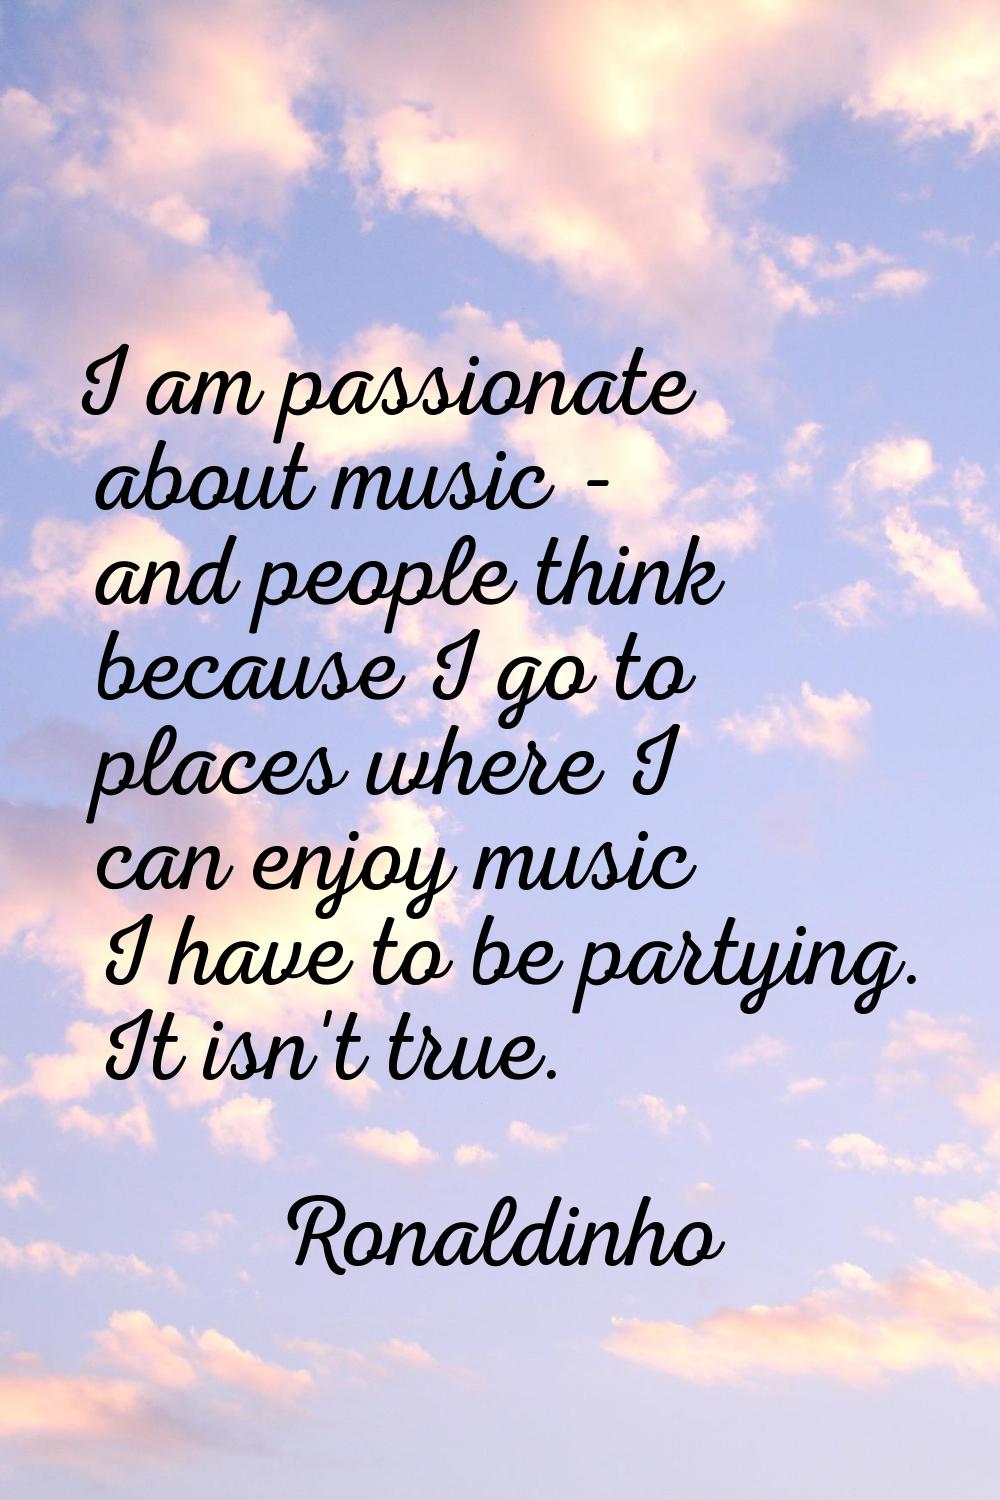 I am passionate about music - and people think because I go to places where I can enjoy music I hav